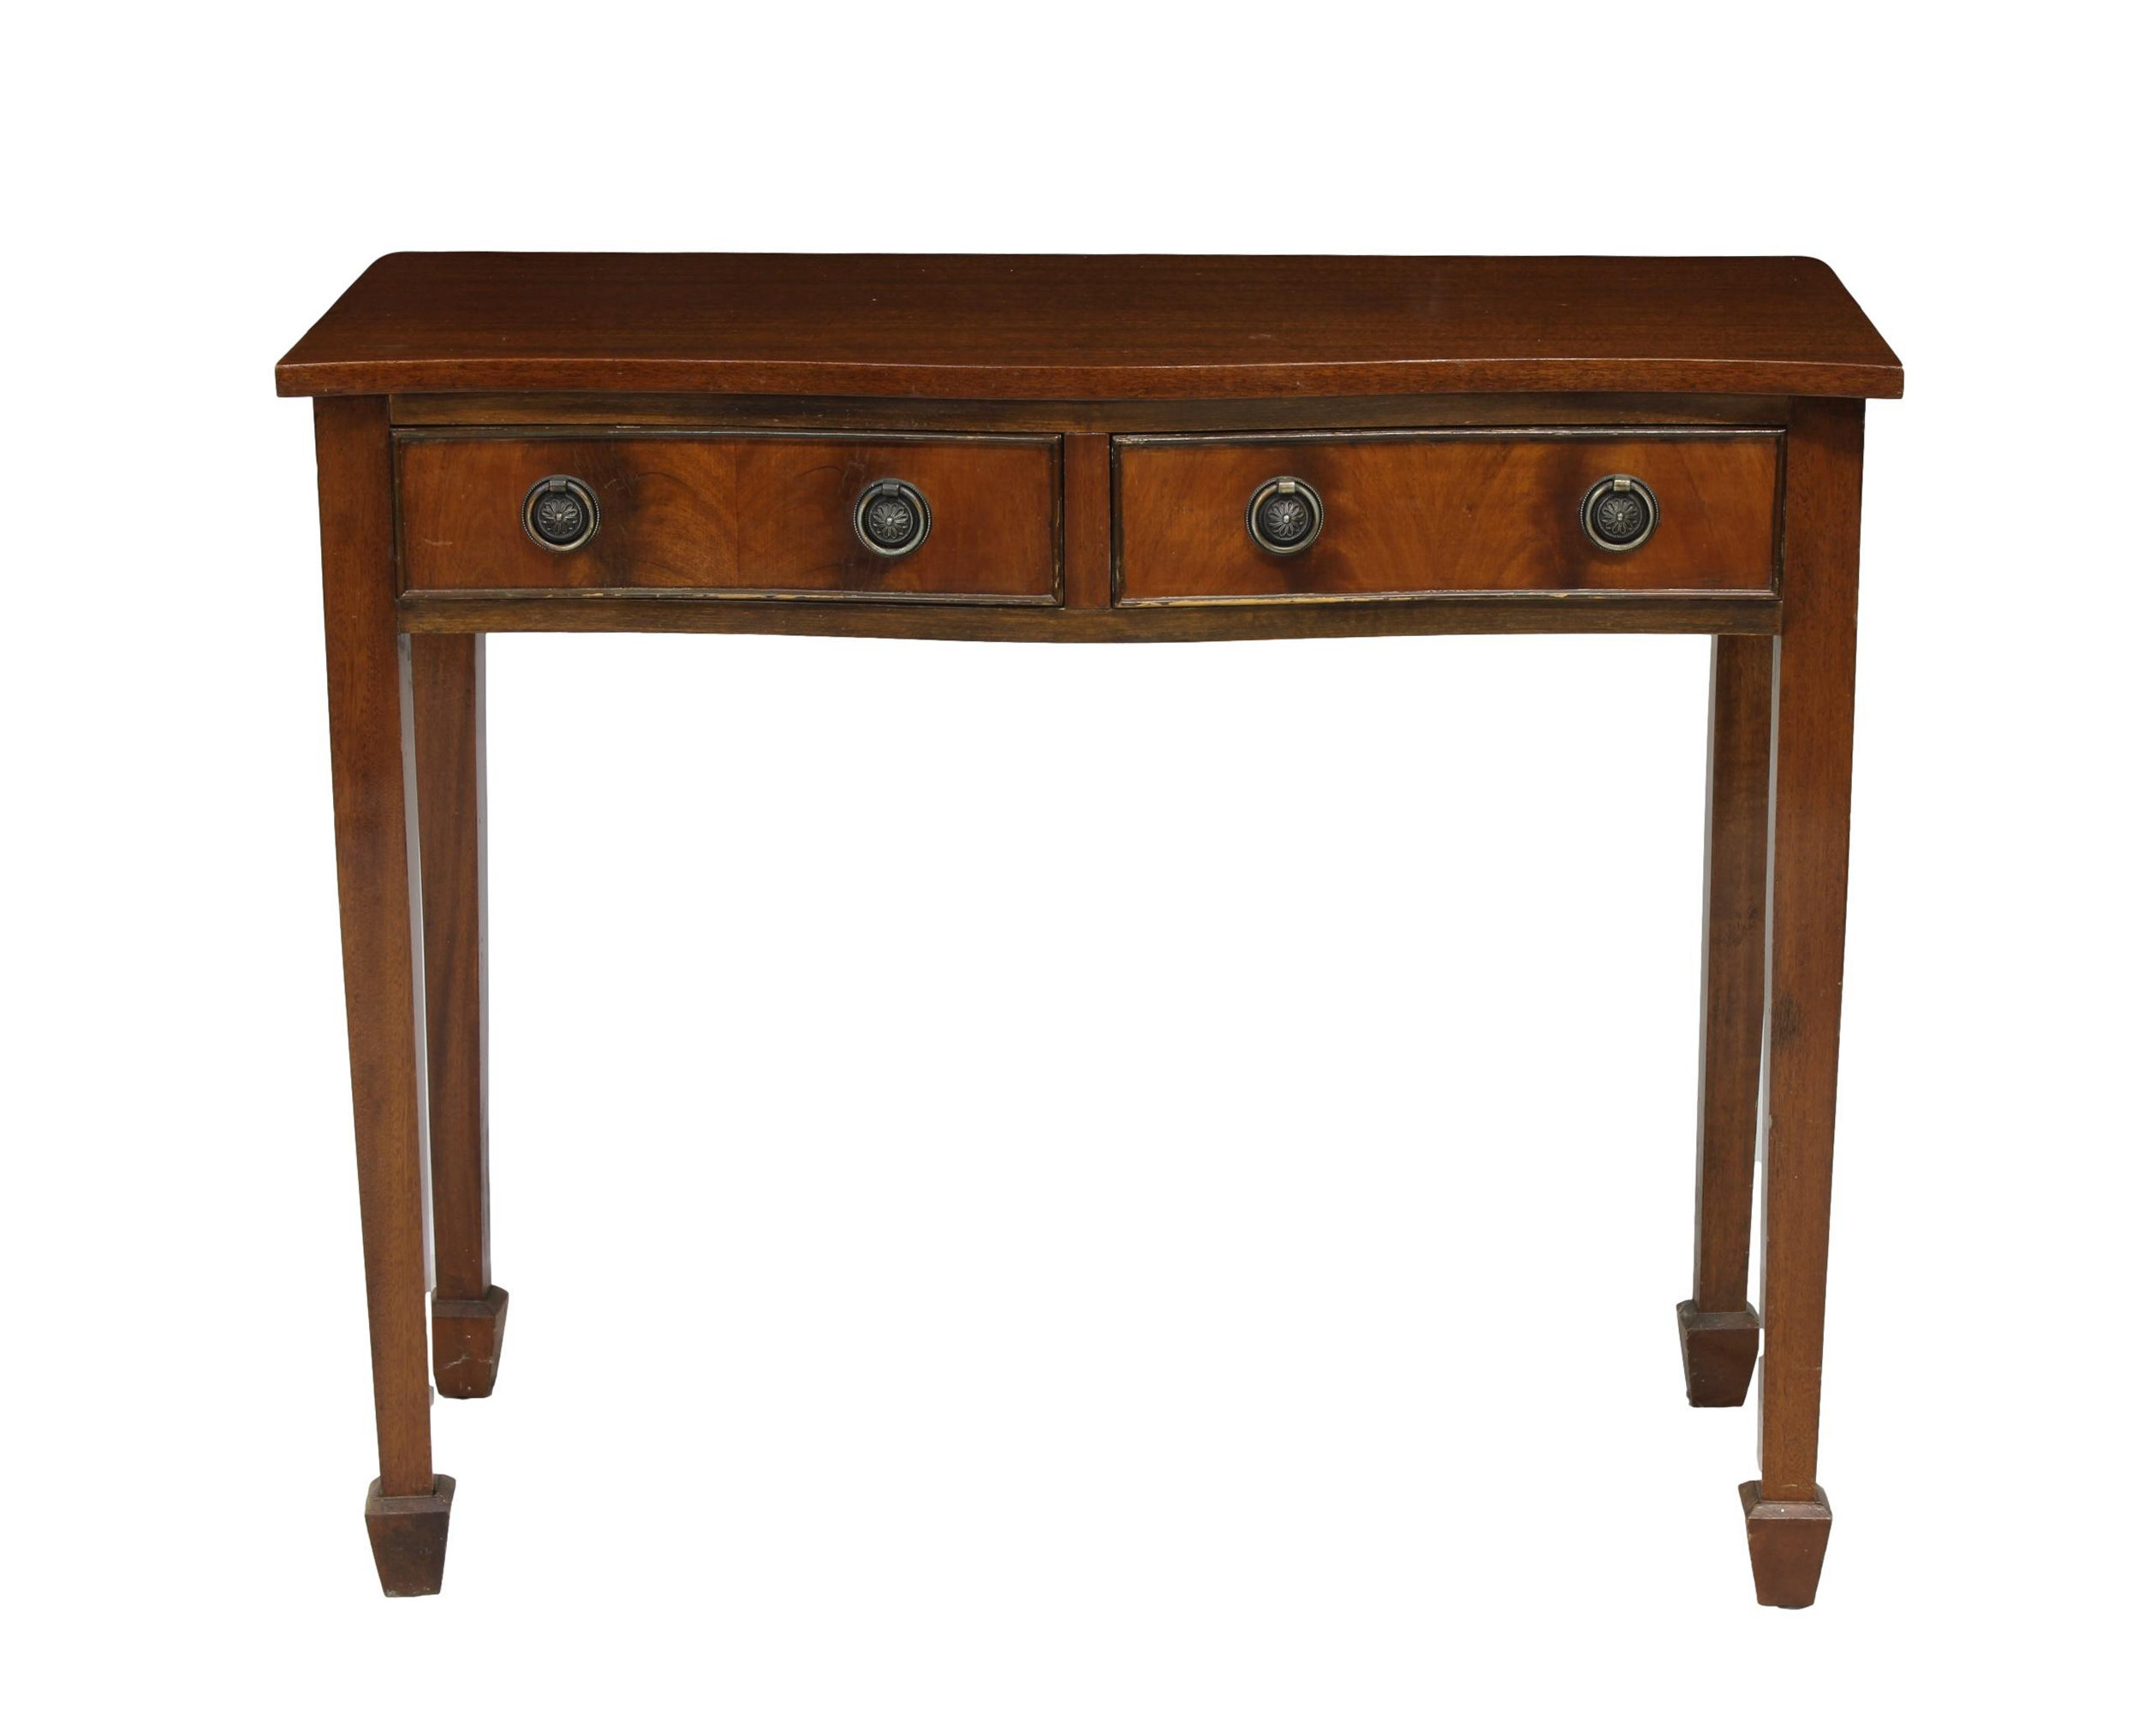 An early 20th century mahogany serpentine console table